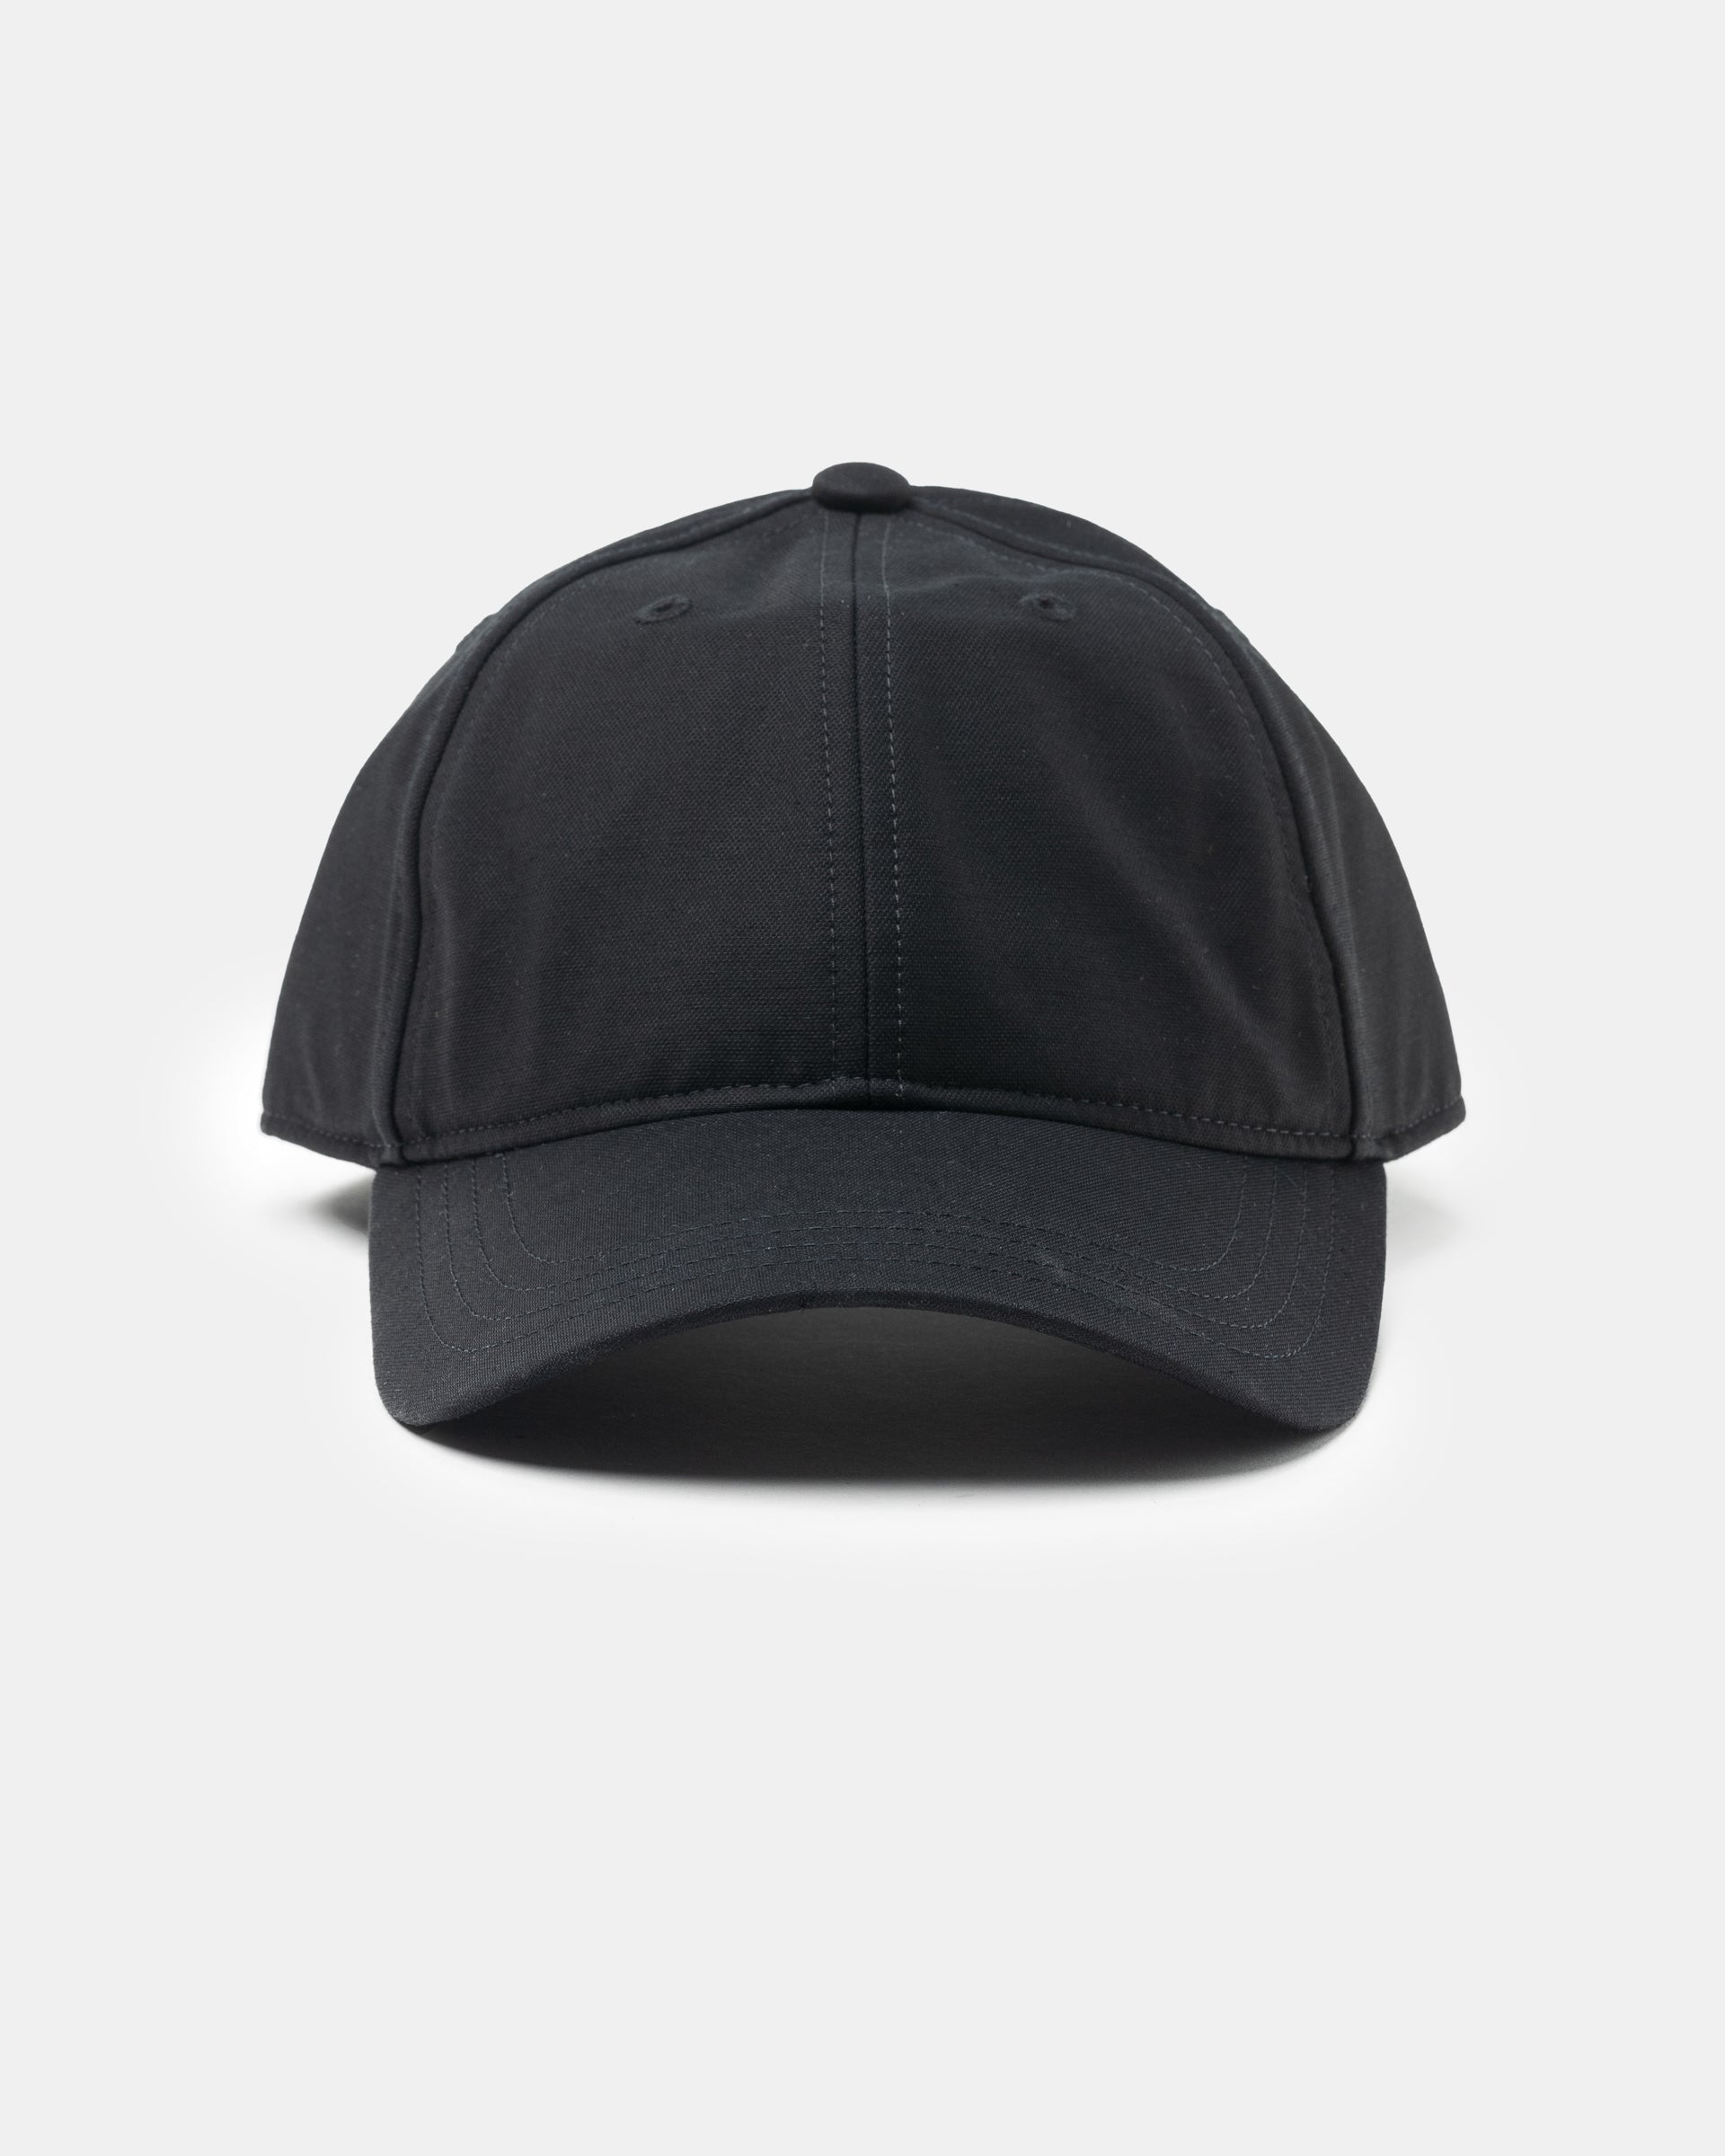 Our Legacy Ballcap in Deluxe Black